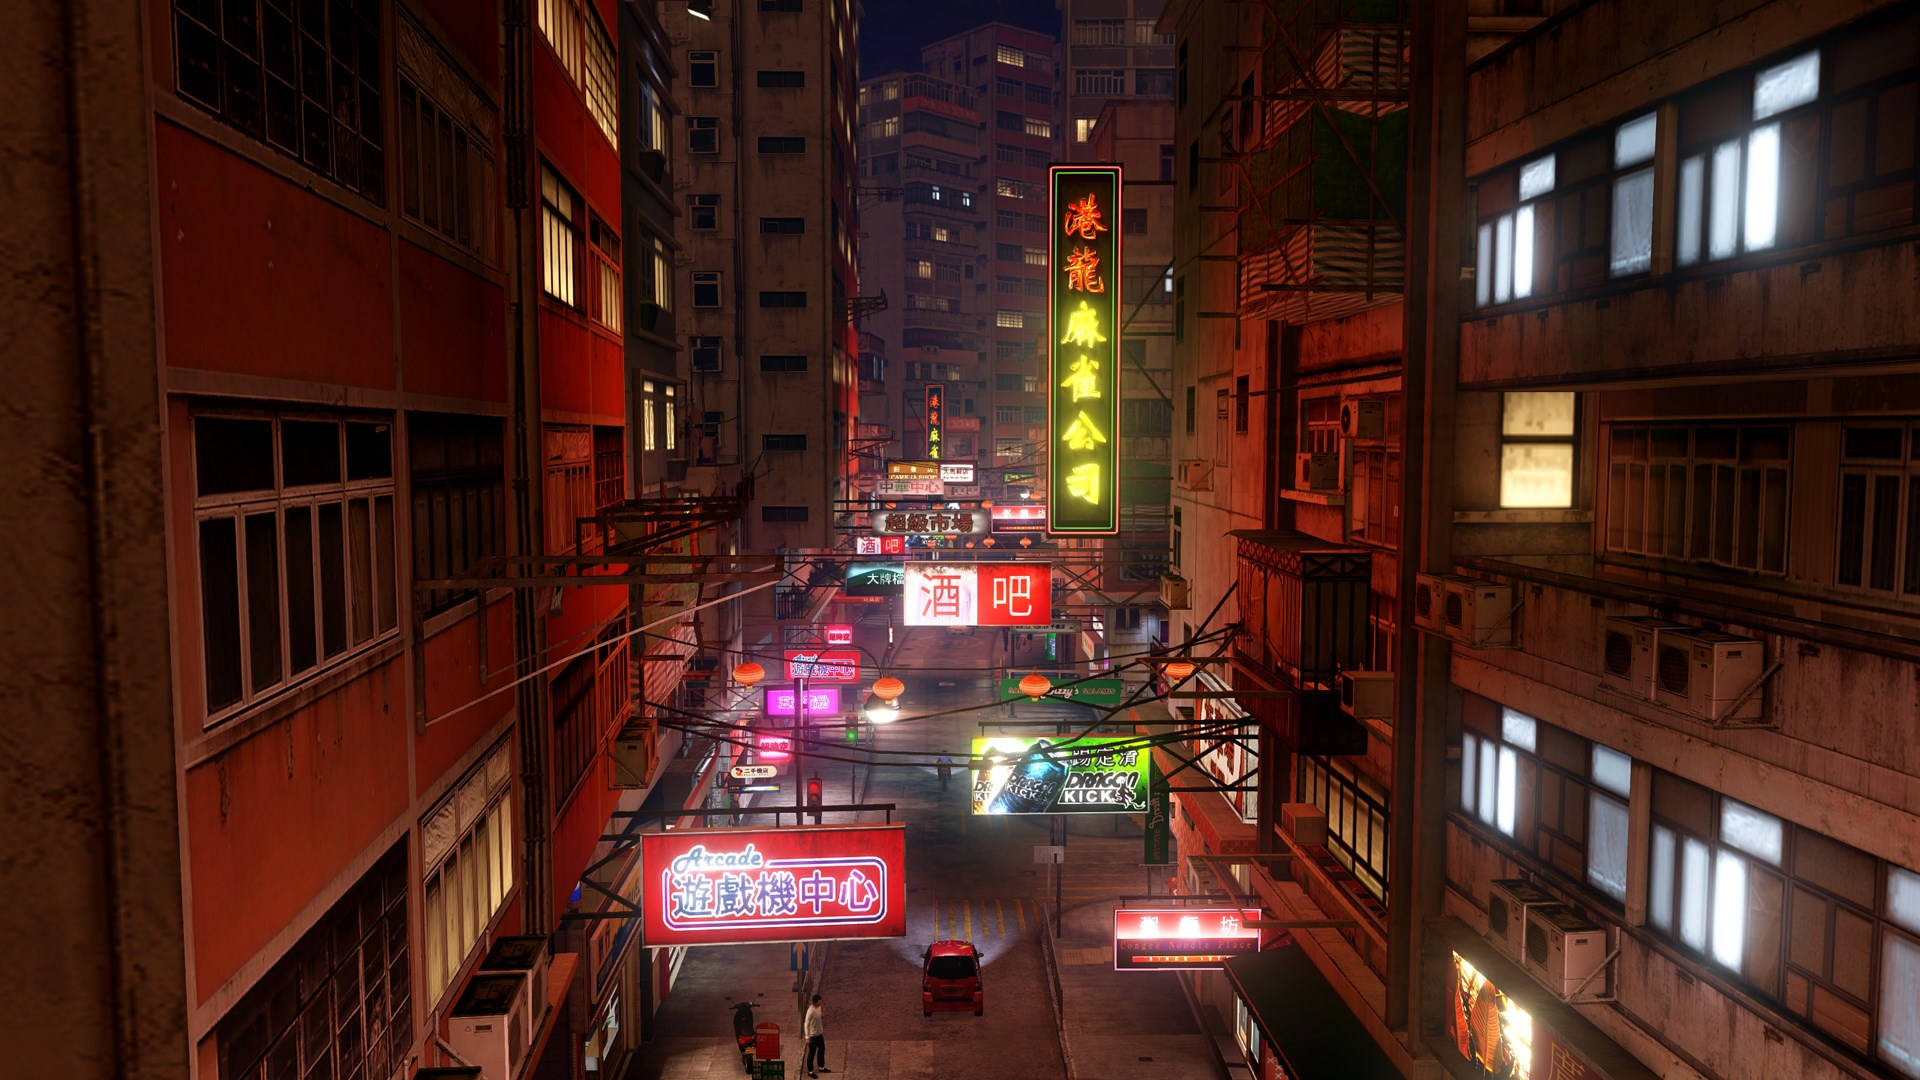 "Turn up the speed in Sleeping Dogs Game!" Wallpaper